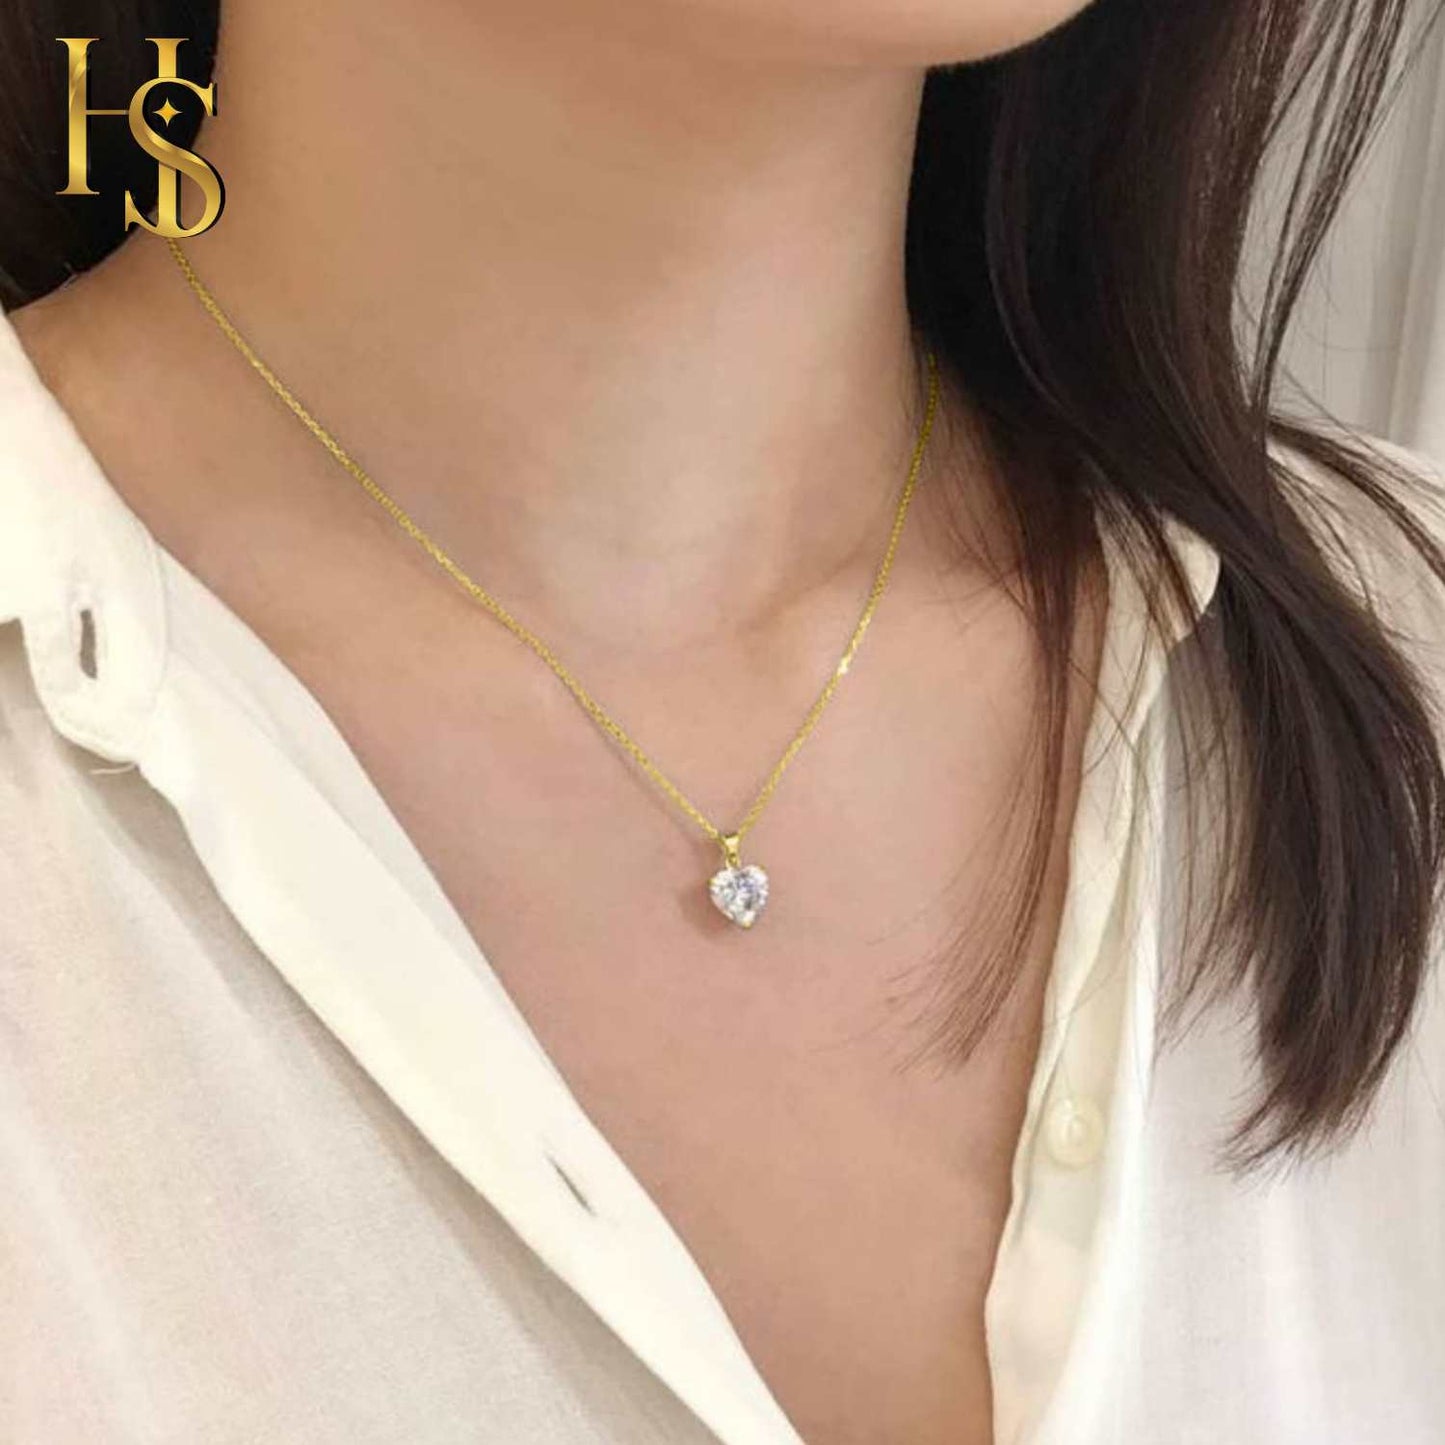 Gold Heart Solitaire Pendant with Chain embellished with Swarovski Zirconia in 18K Gold Finish - 92.5 Silver in 18K Gold Finish